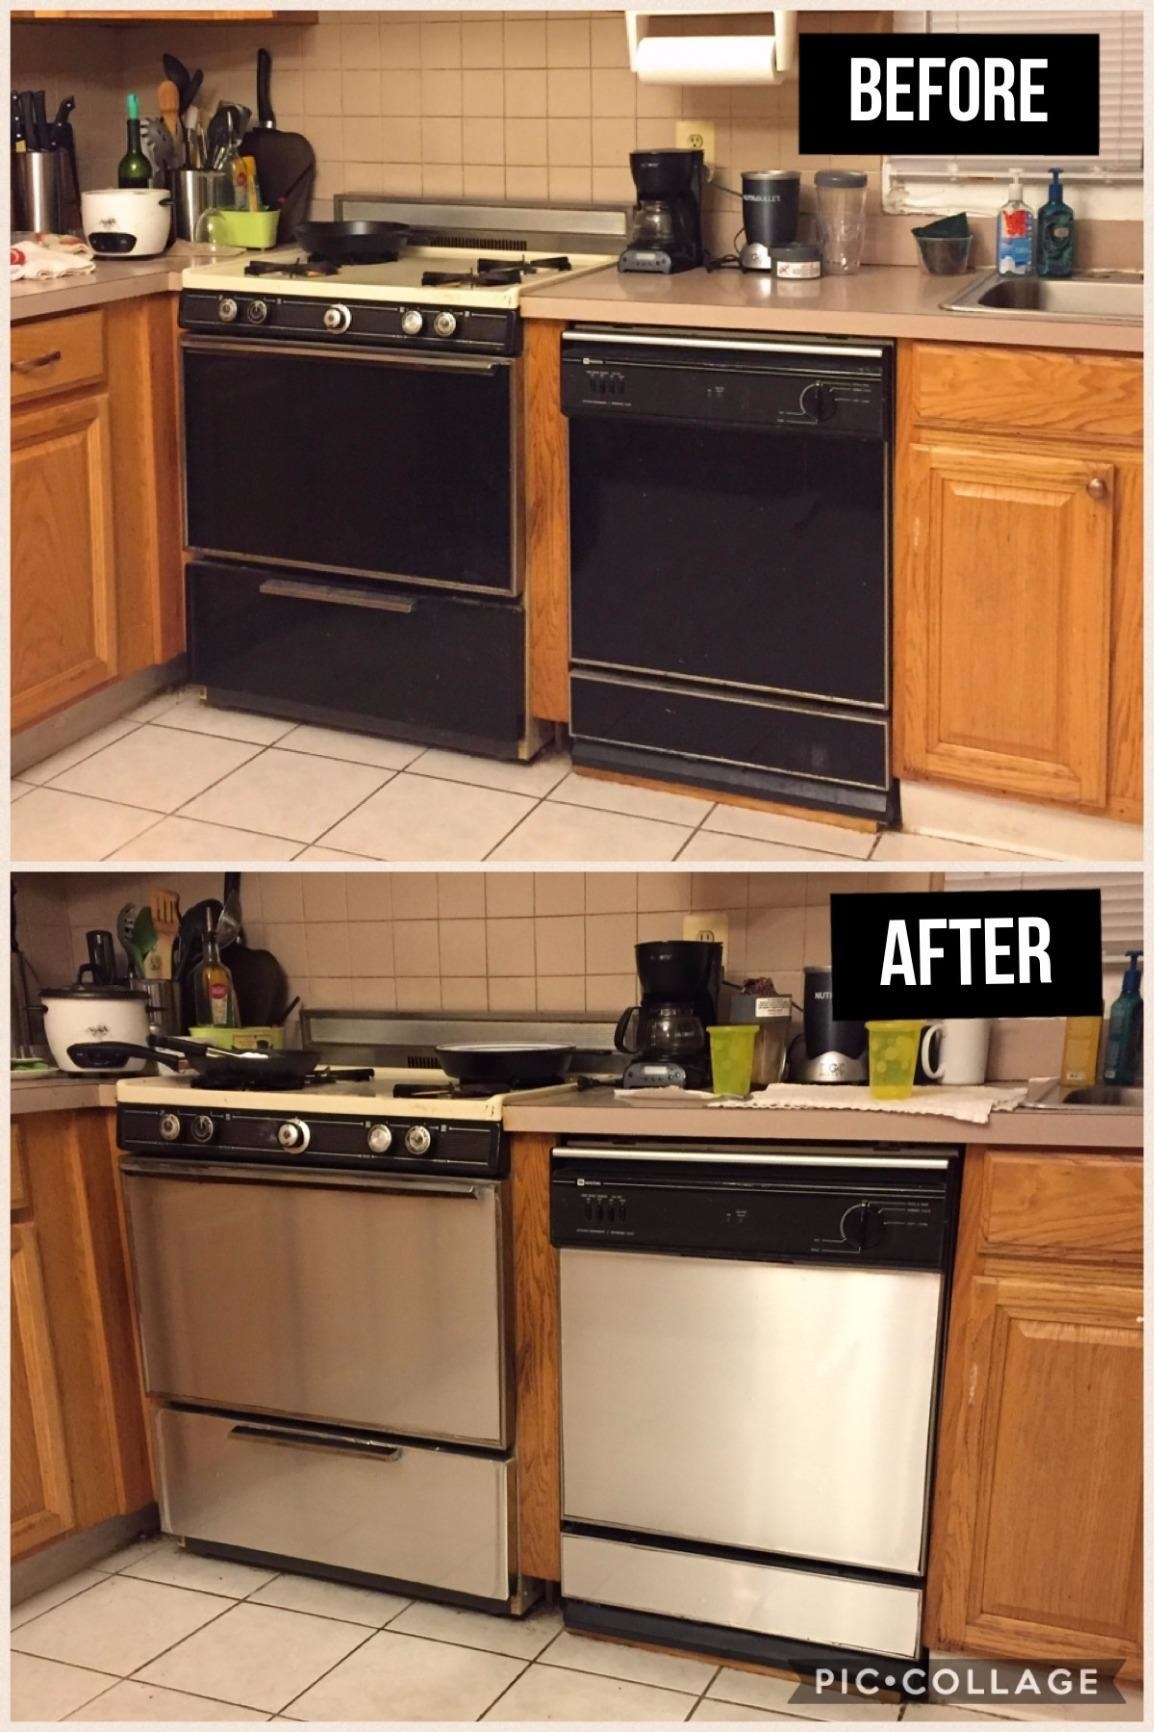 reviewer before and after of their dishwasher and oven entirely black and older looking before, now covered in the stainless steel contact paper and looking much improved